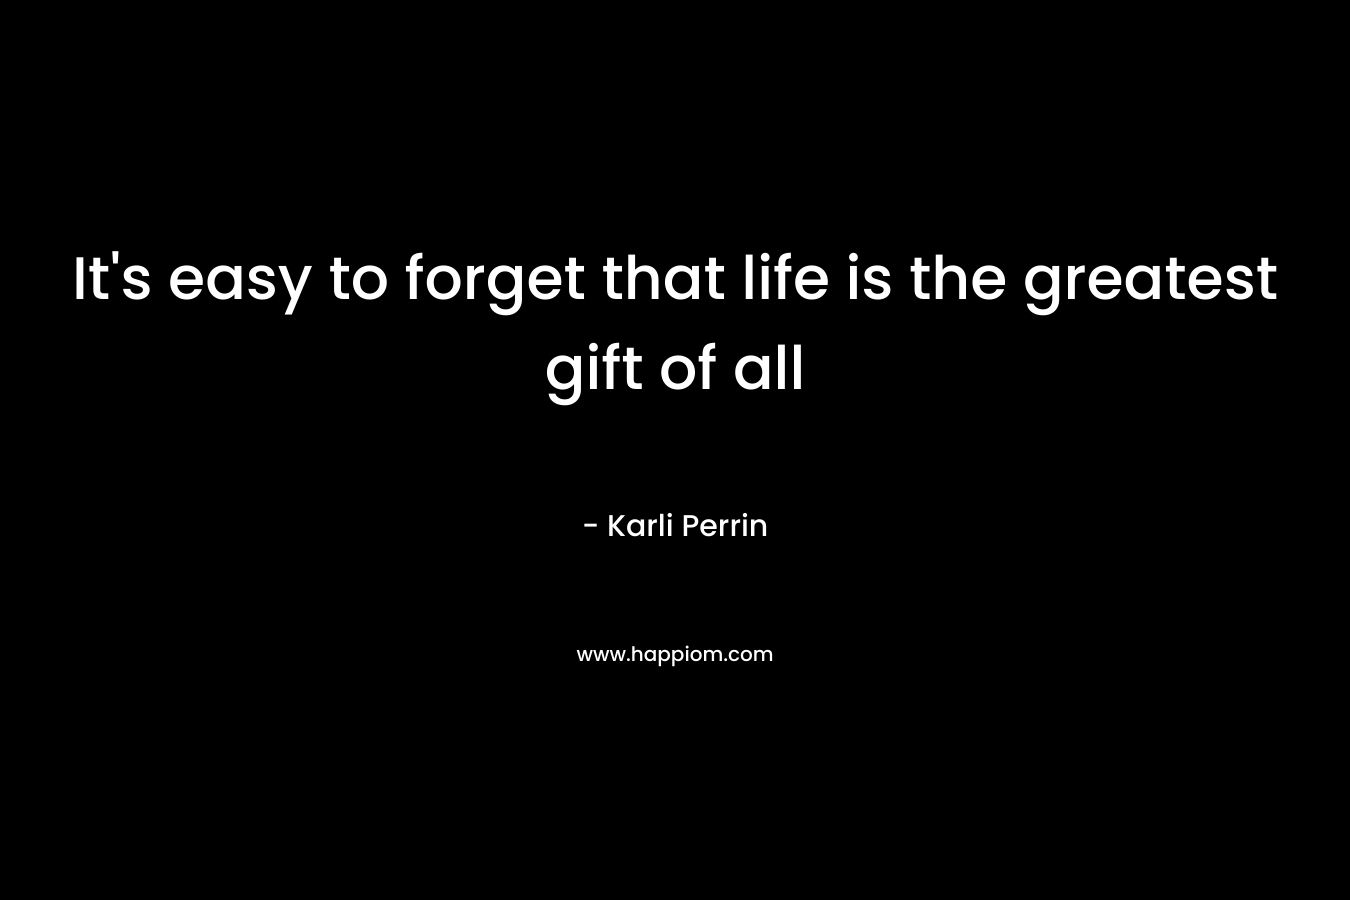 It’s easy to forget that life is the greatest gift of all – Karli Perrin